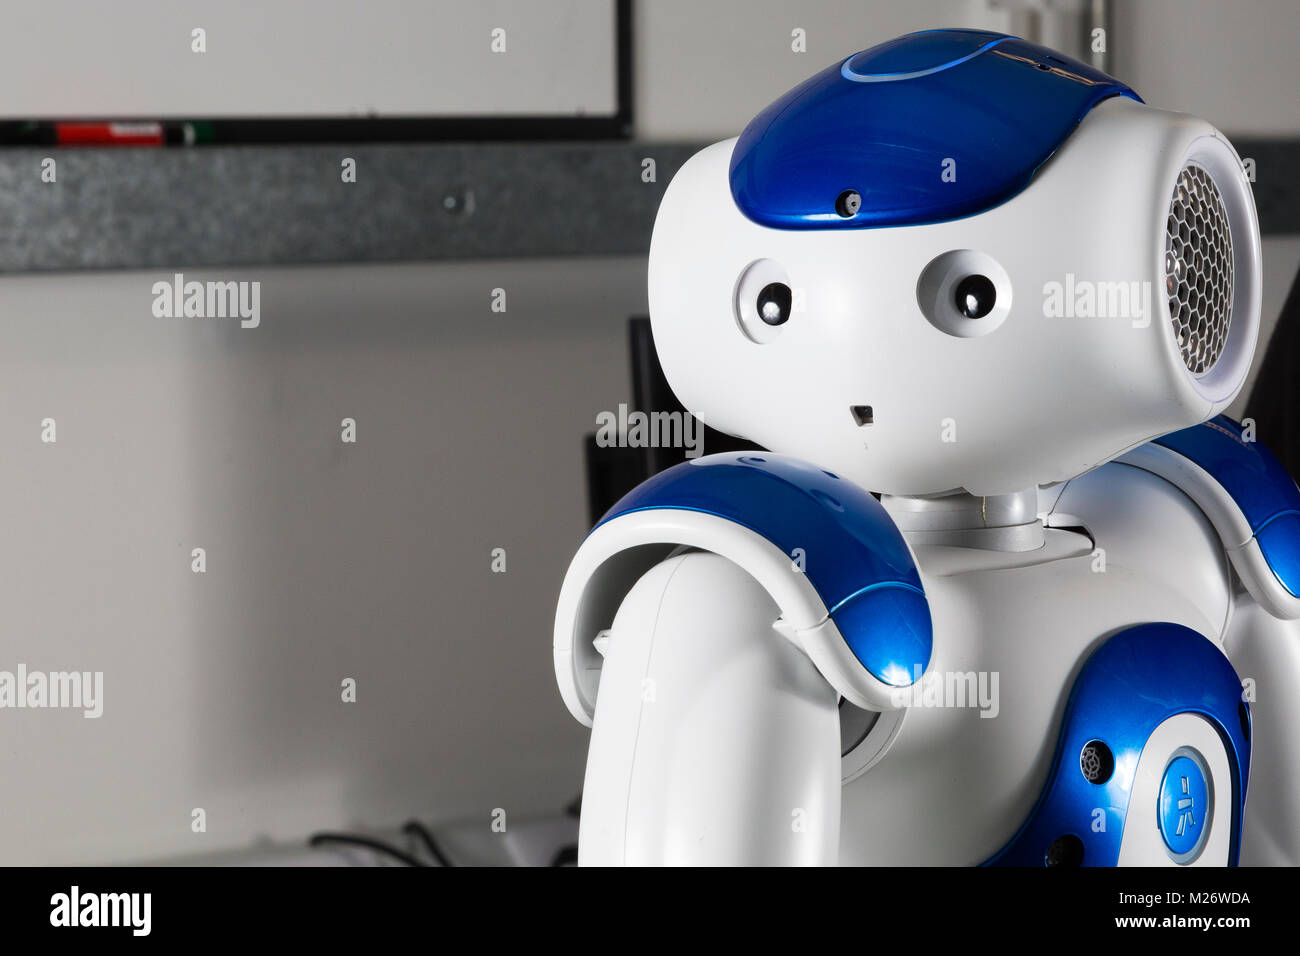 A white and blue robot looks over its shoulder. Stock Photo